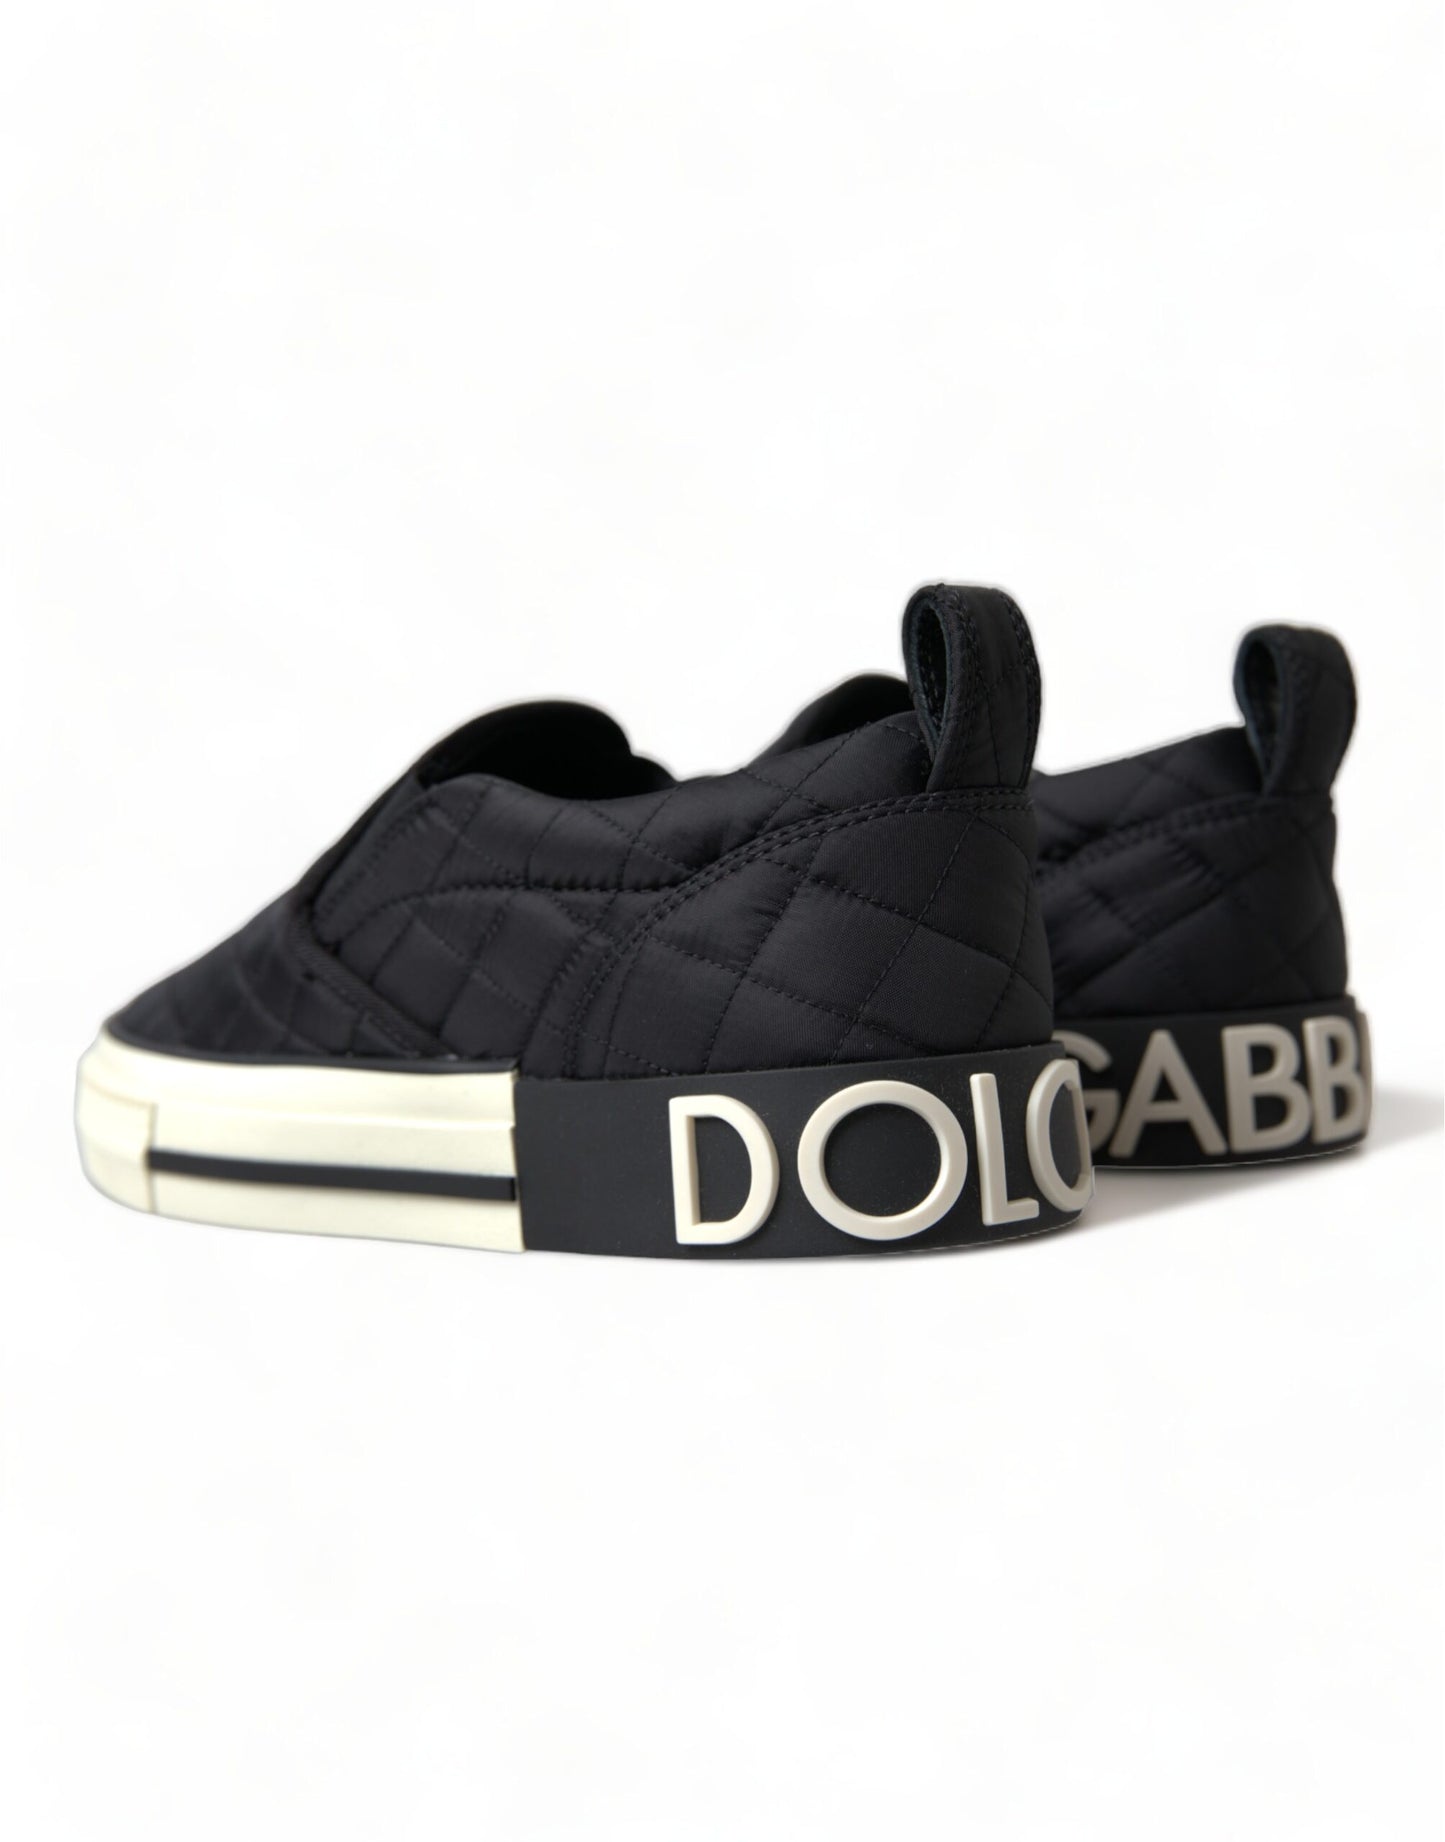 Dolce & Gabbana Black Quilted Slip On Low Top Sneakers Shoes - DEA STILOSA MILANO